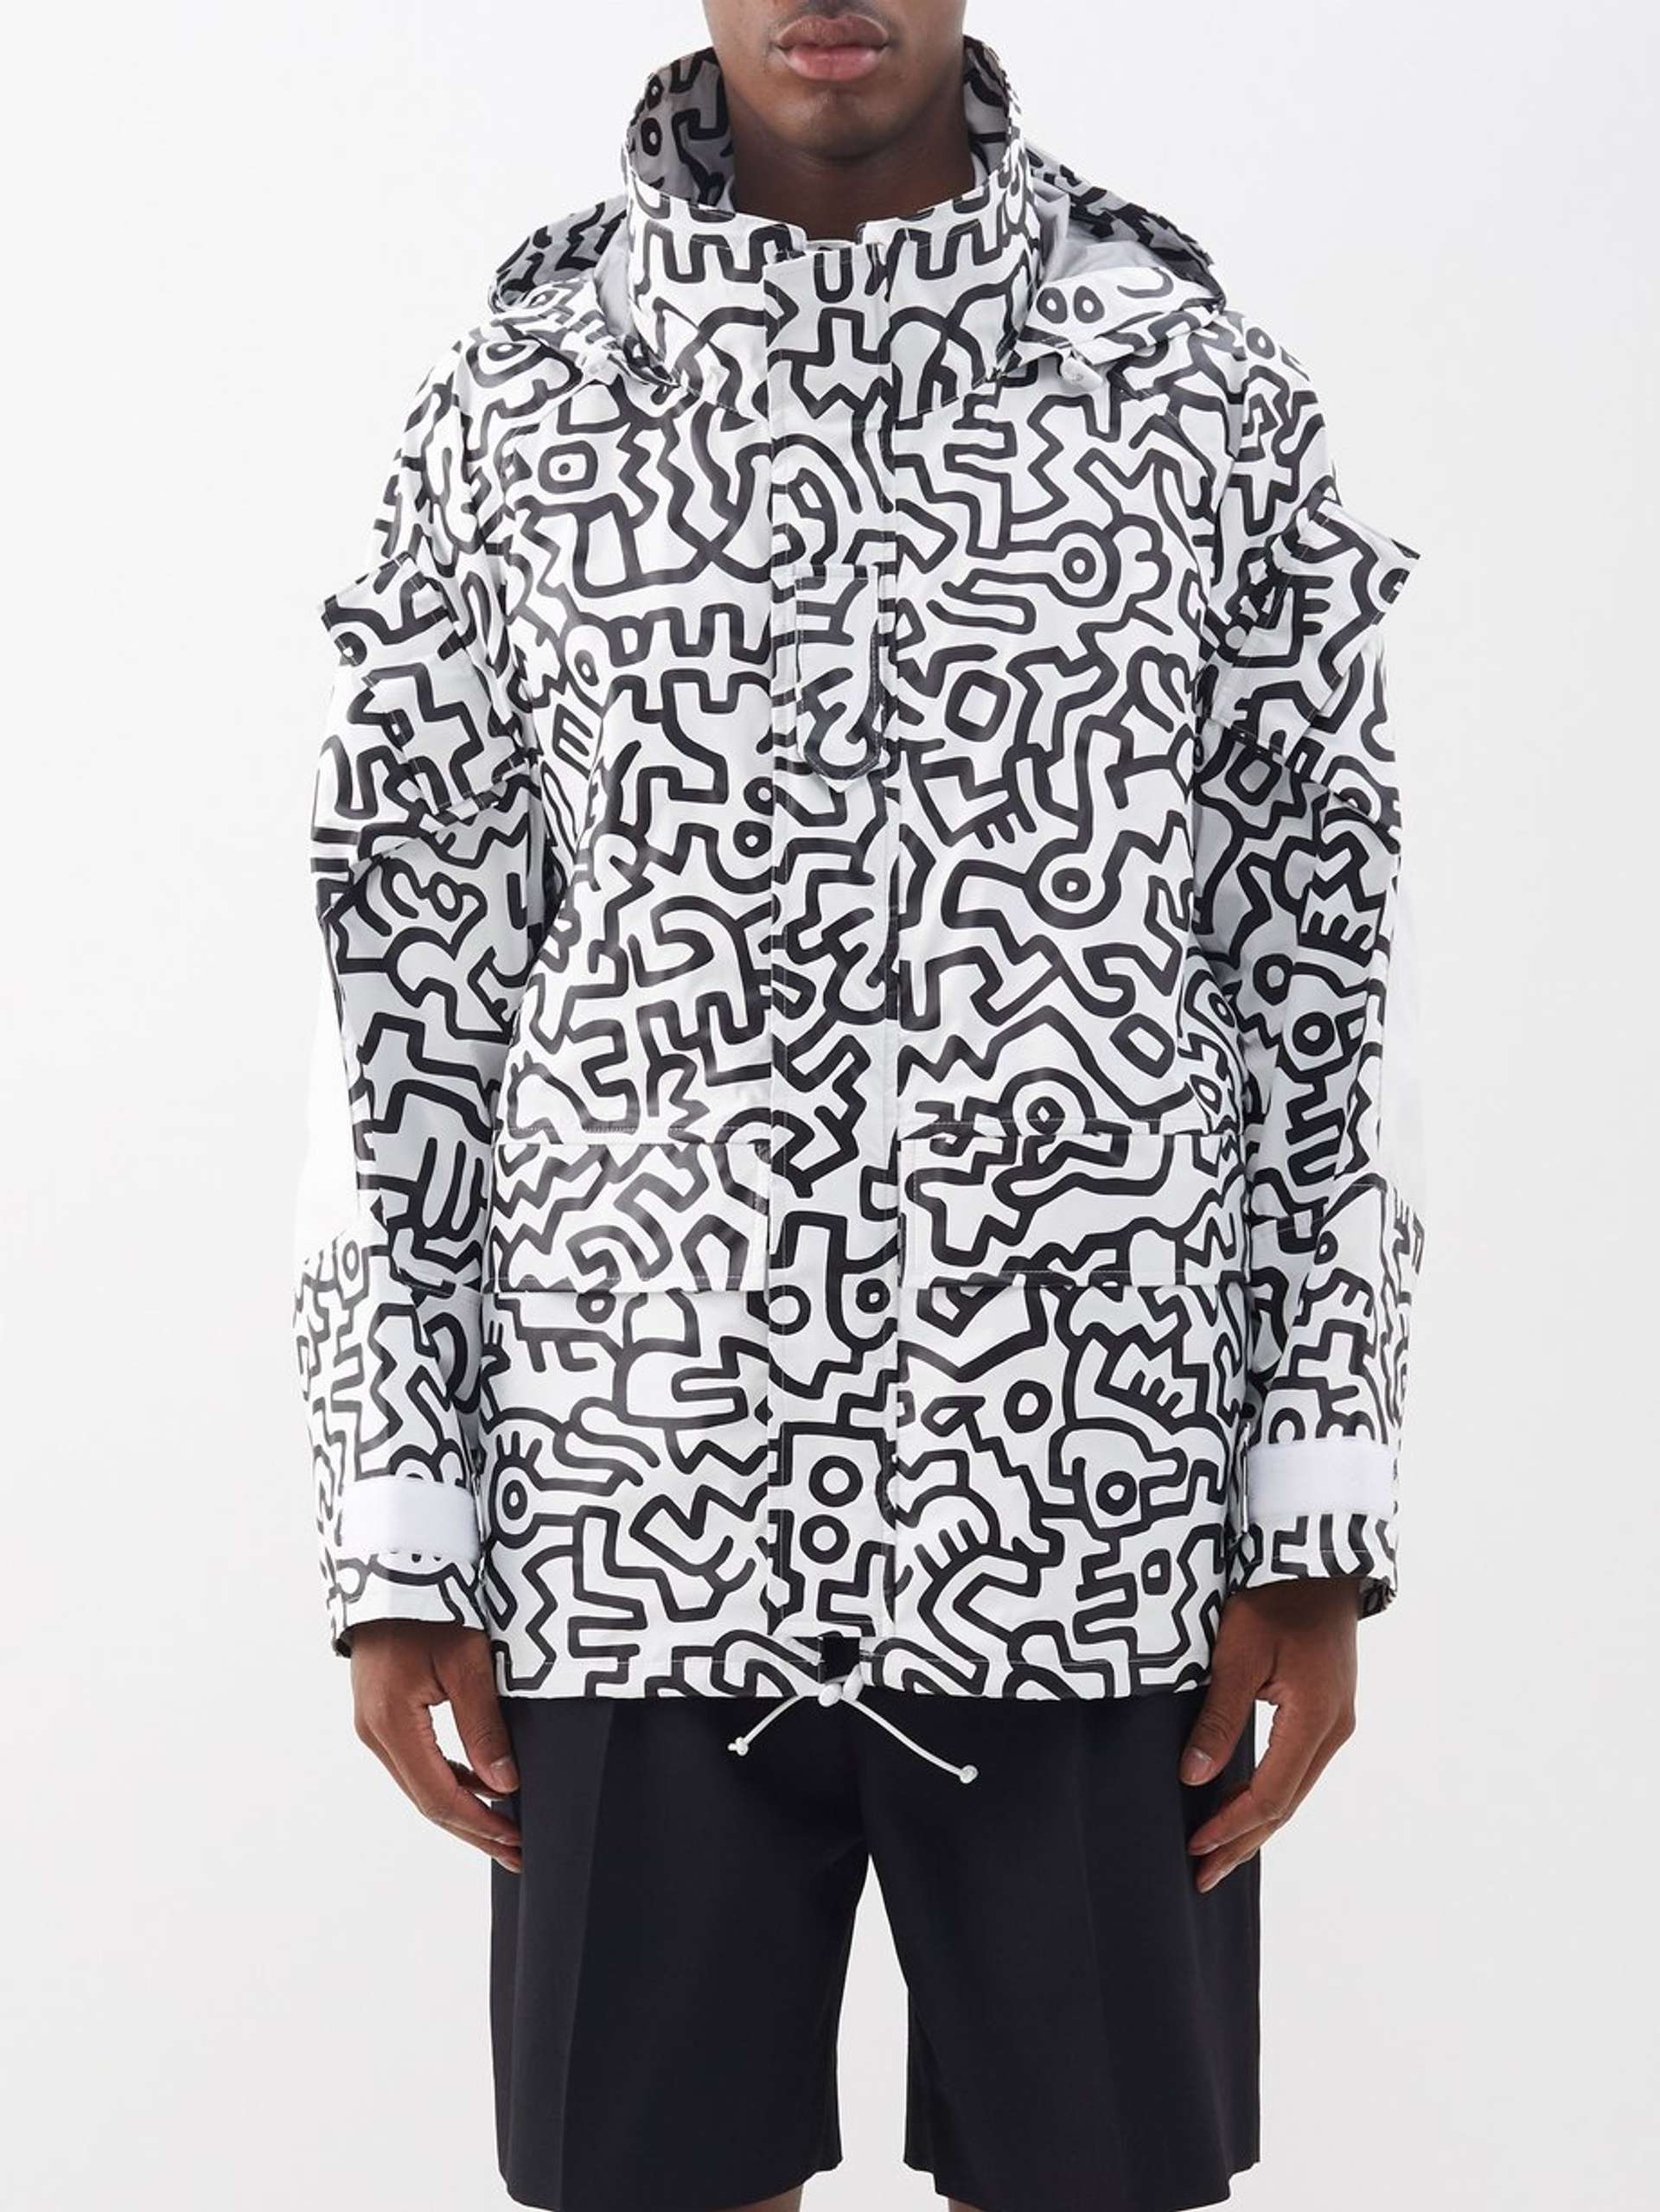 An image of a model wearing a white windbreaker Junya Watanabe jacket that is completely covered in Keith Haring’s signature doodles in black.